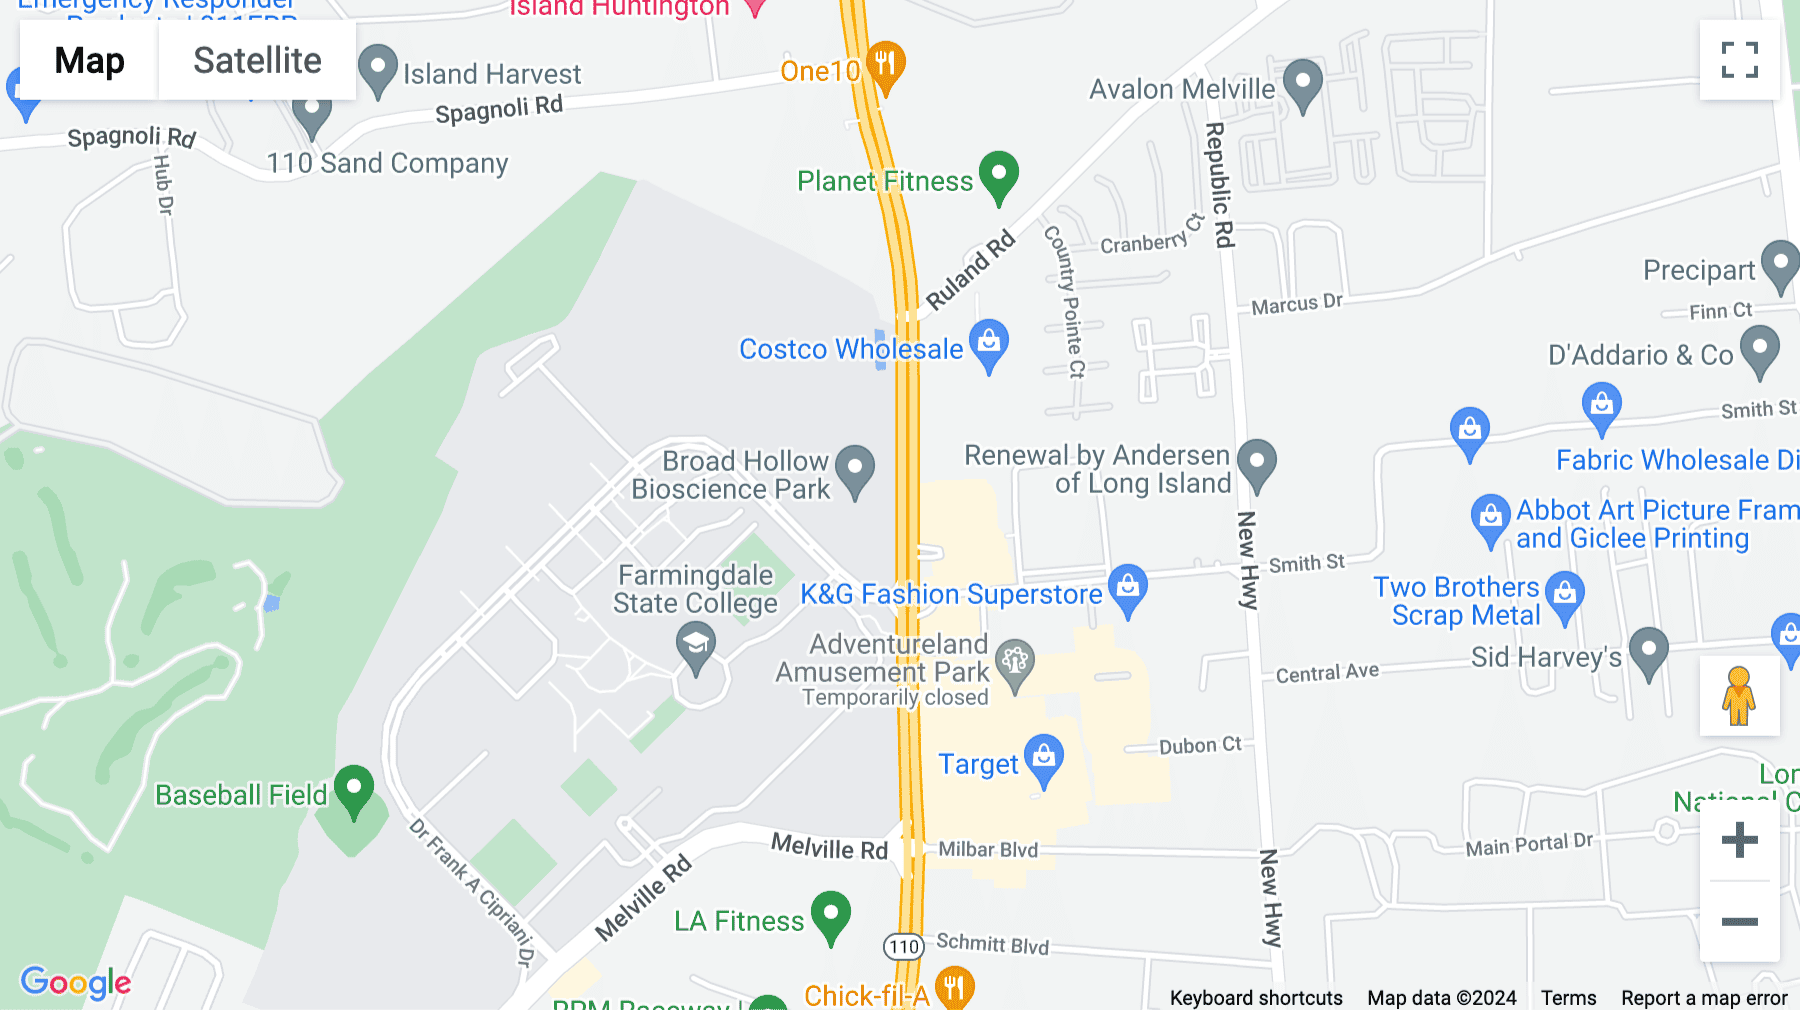 Click for interative map of 200 Broadhollow Road, Suite 207, Melville Broadhollow Center, Melville